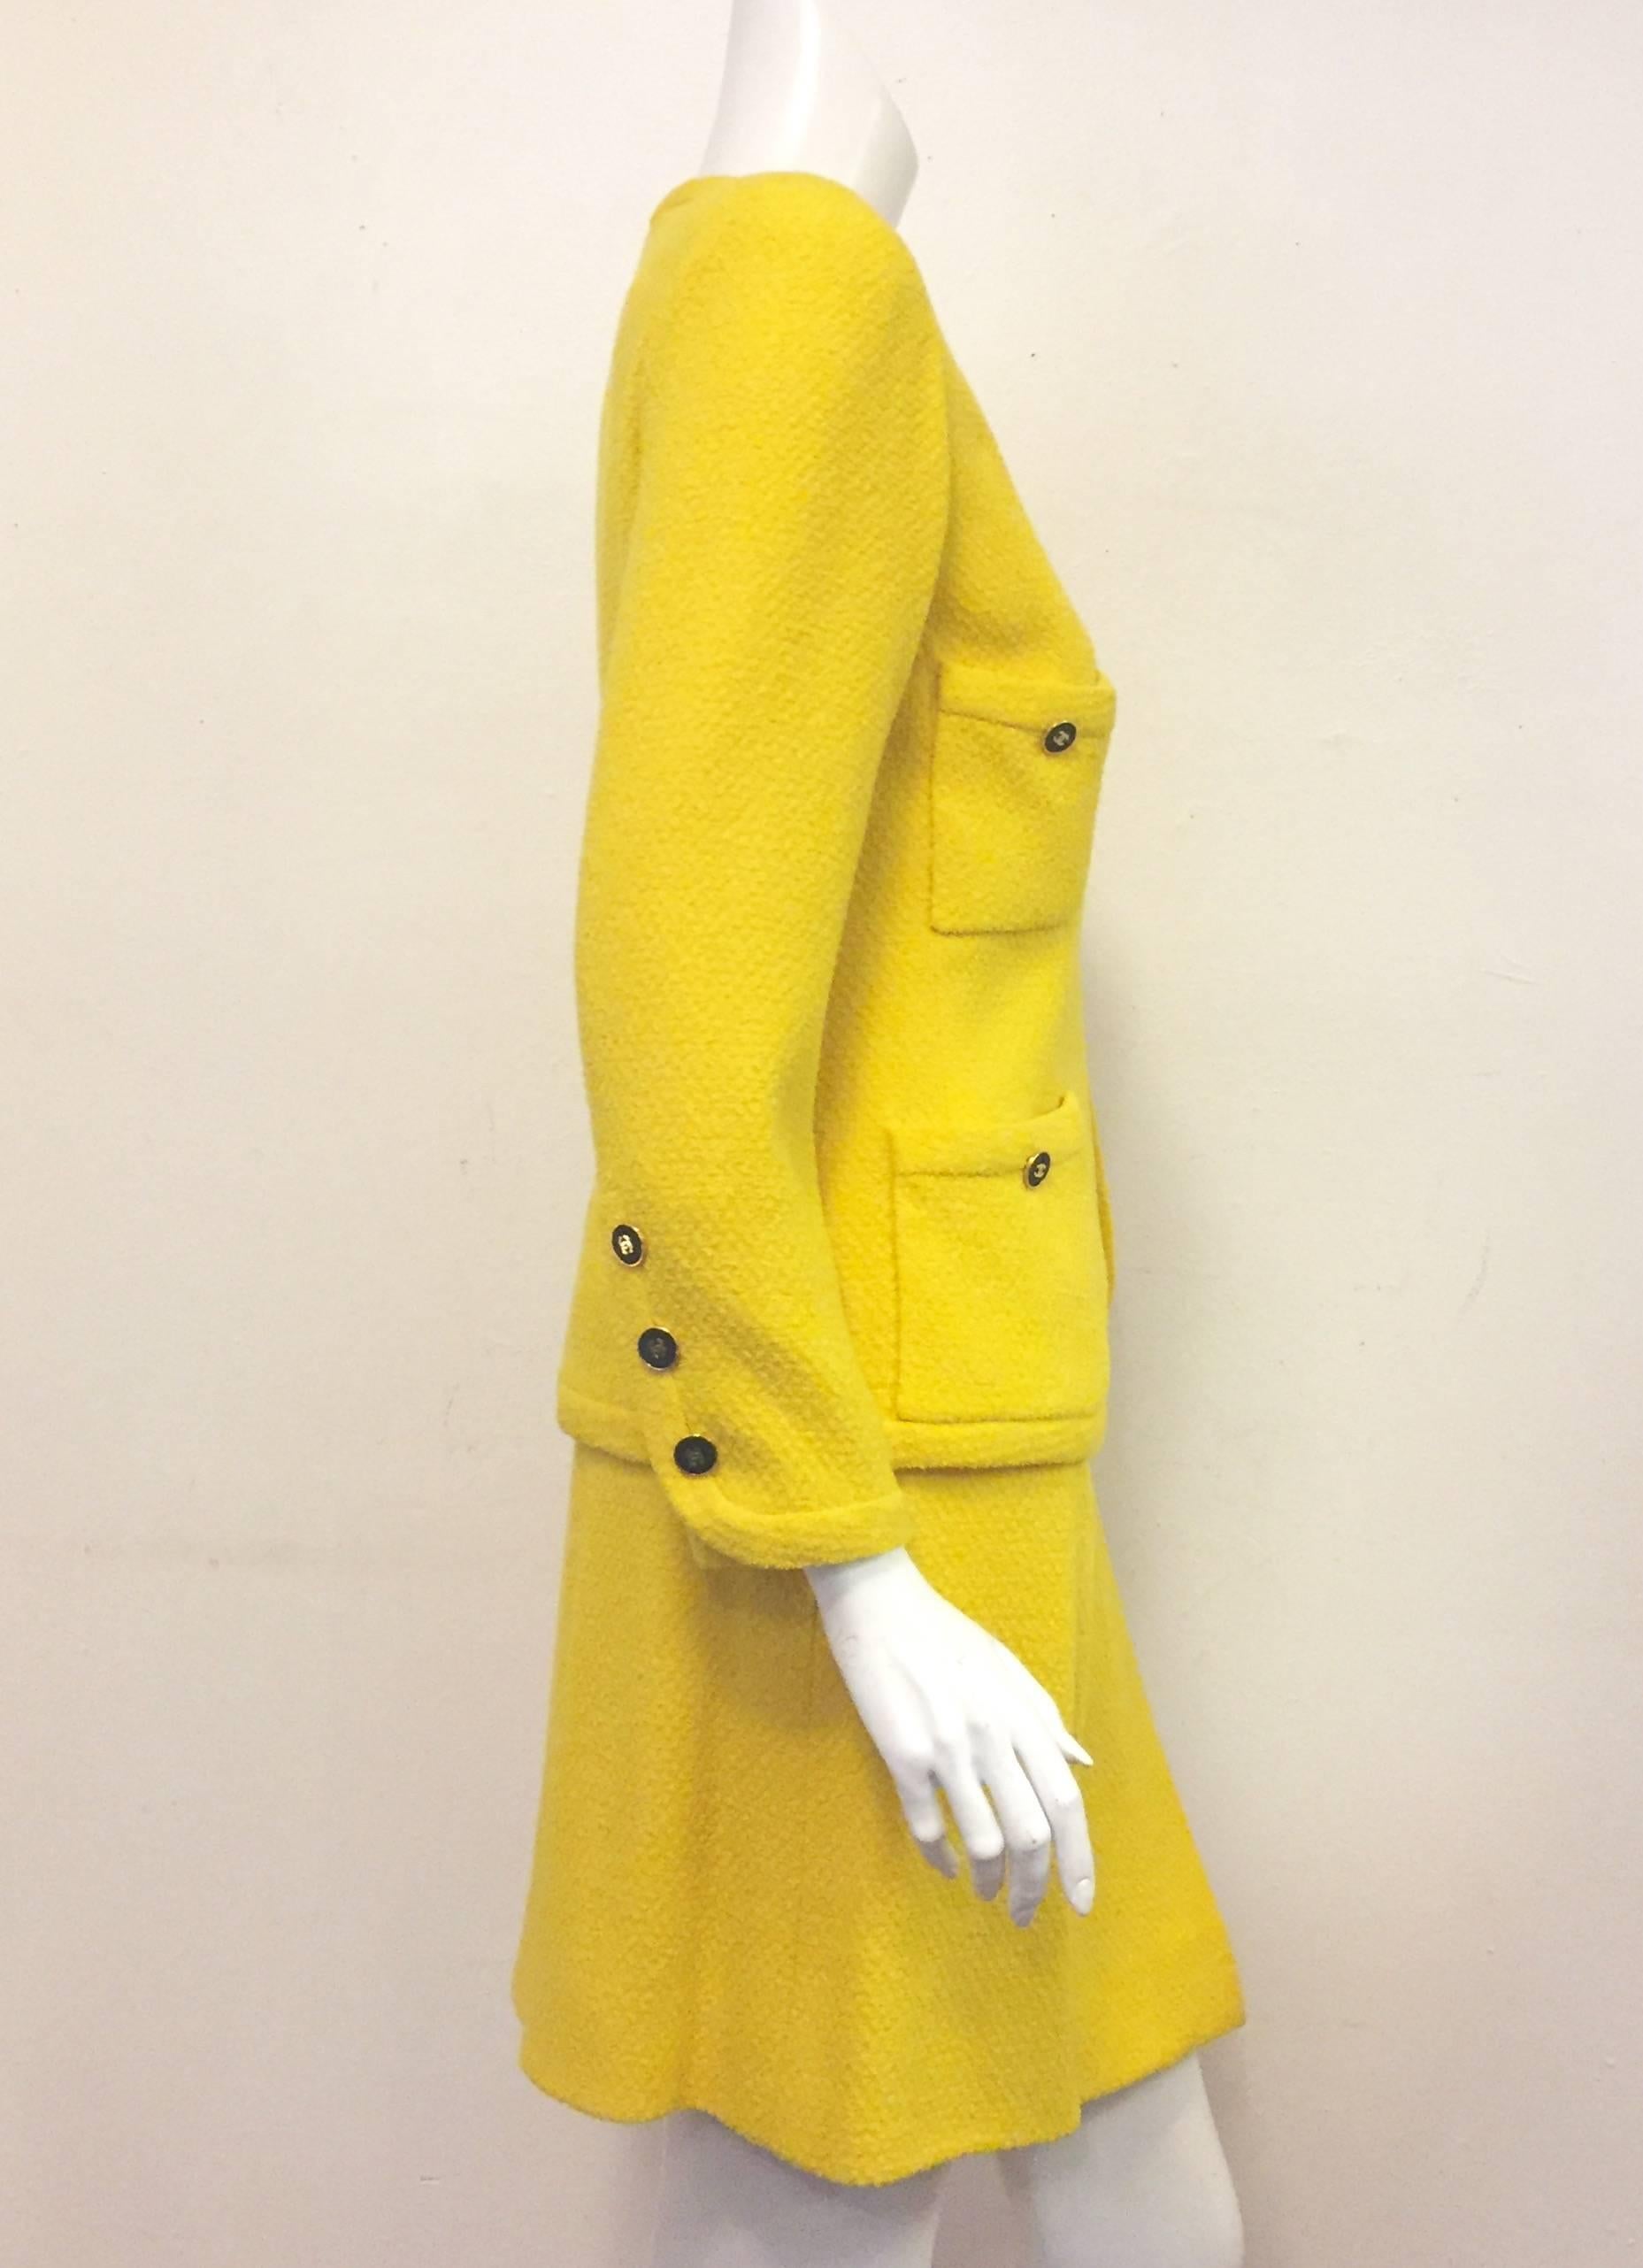 Chanel Boutique sunshine yellow wool skirt suit will lift your spirits and give you warmth during cold winter months.  This long sleeve suit features 4 bucket pockets and 4 gold tone and black CC buttons for closure.  Collarless, open concept jacket